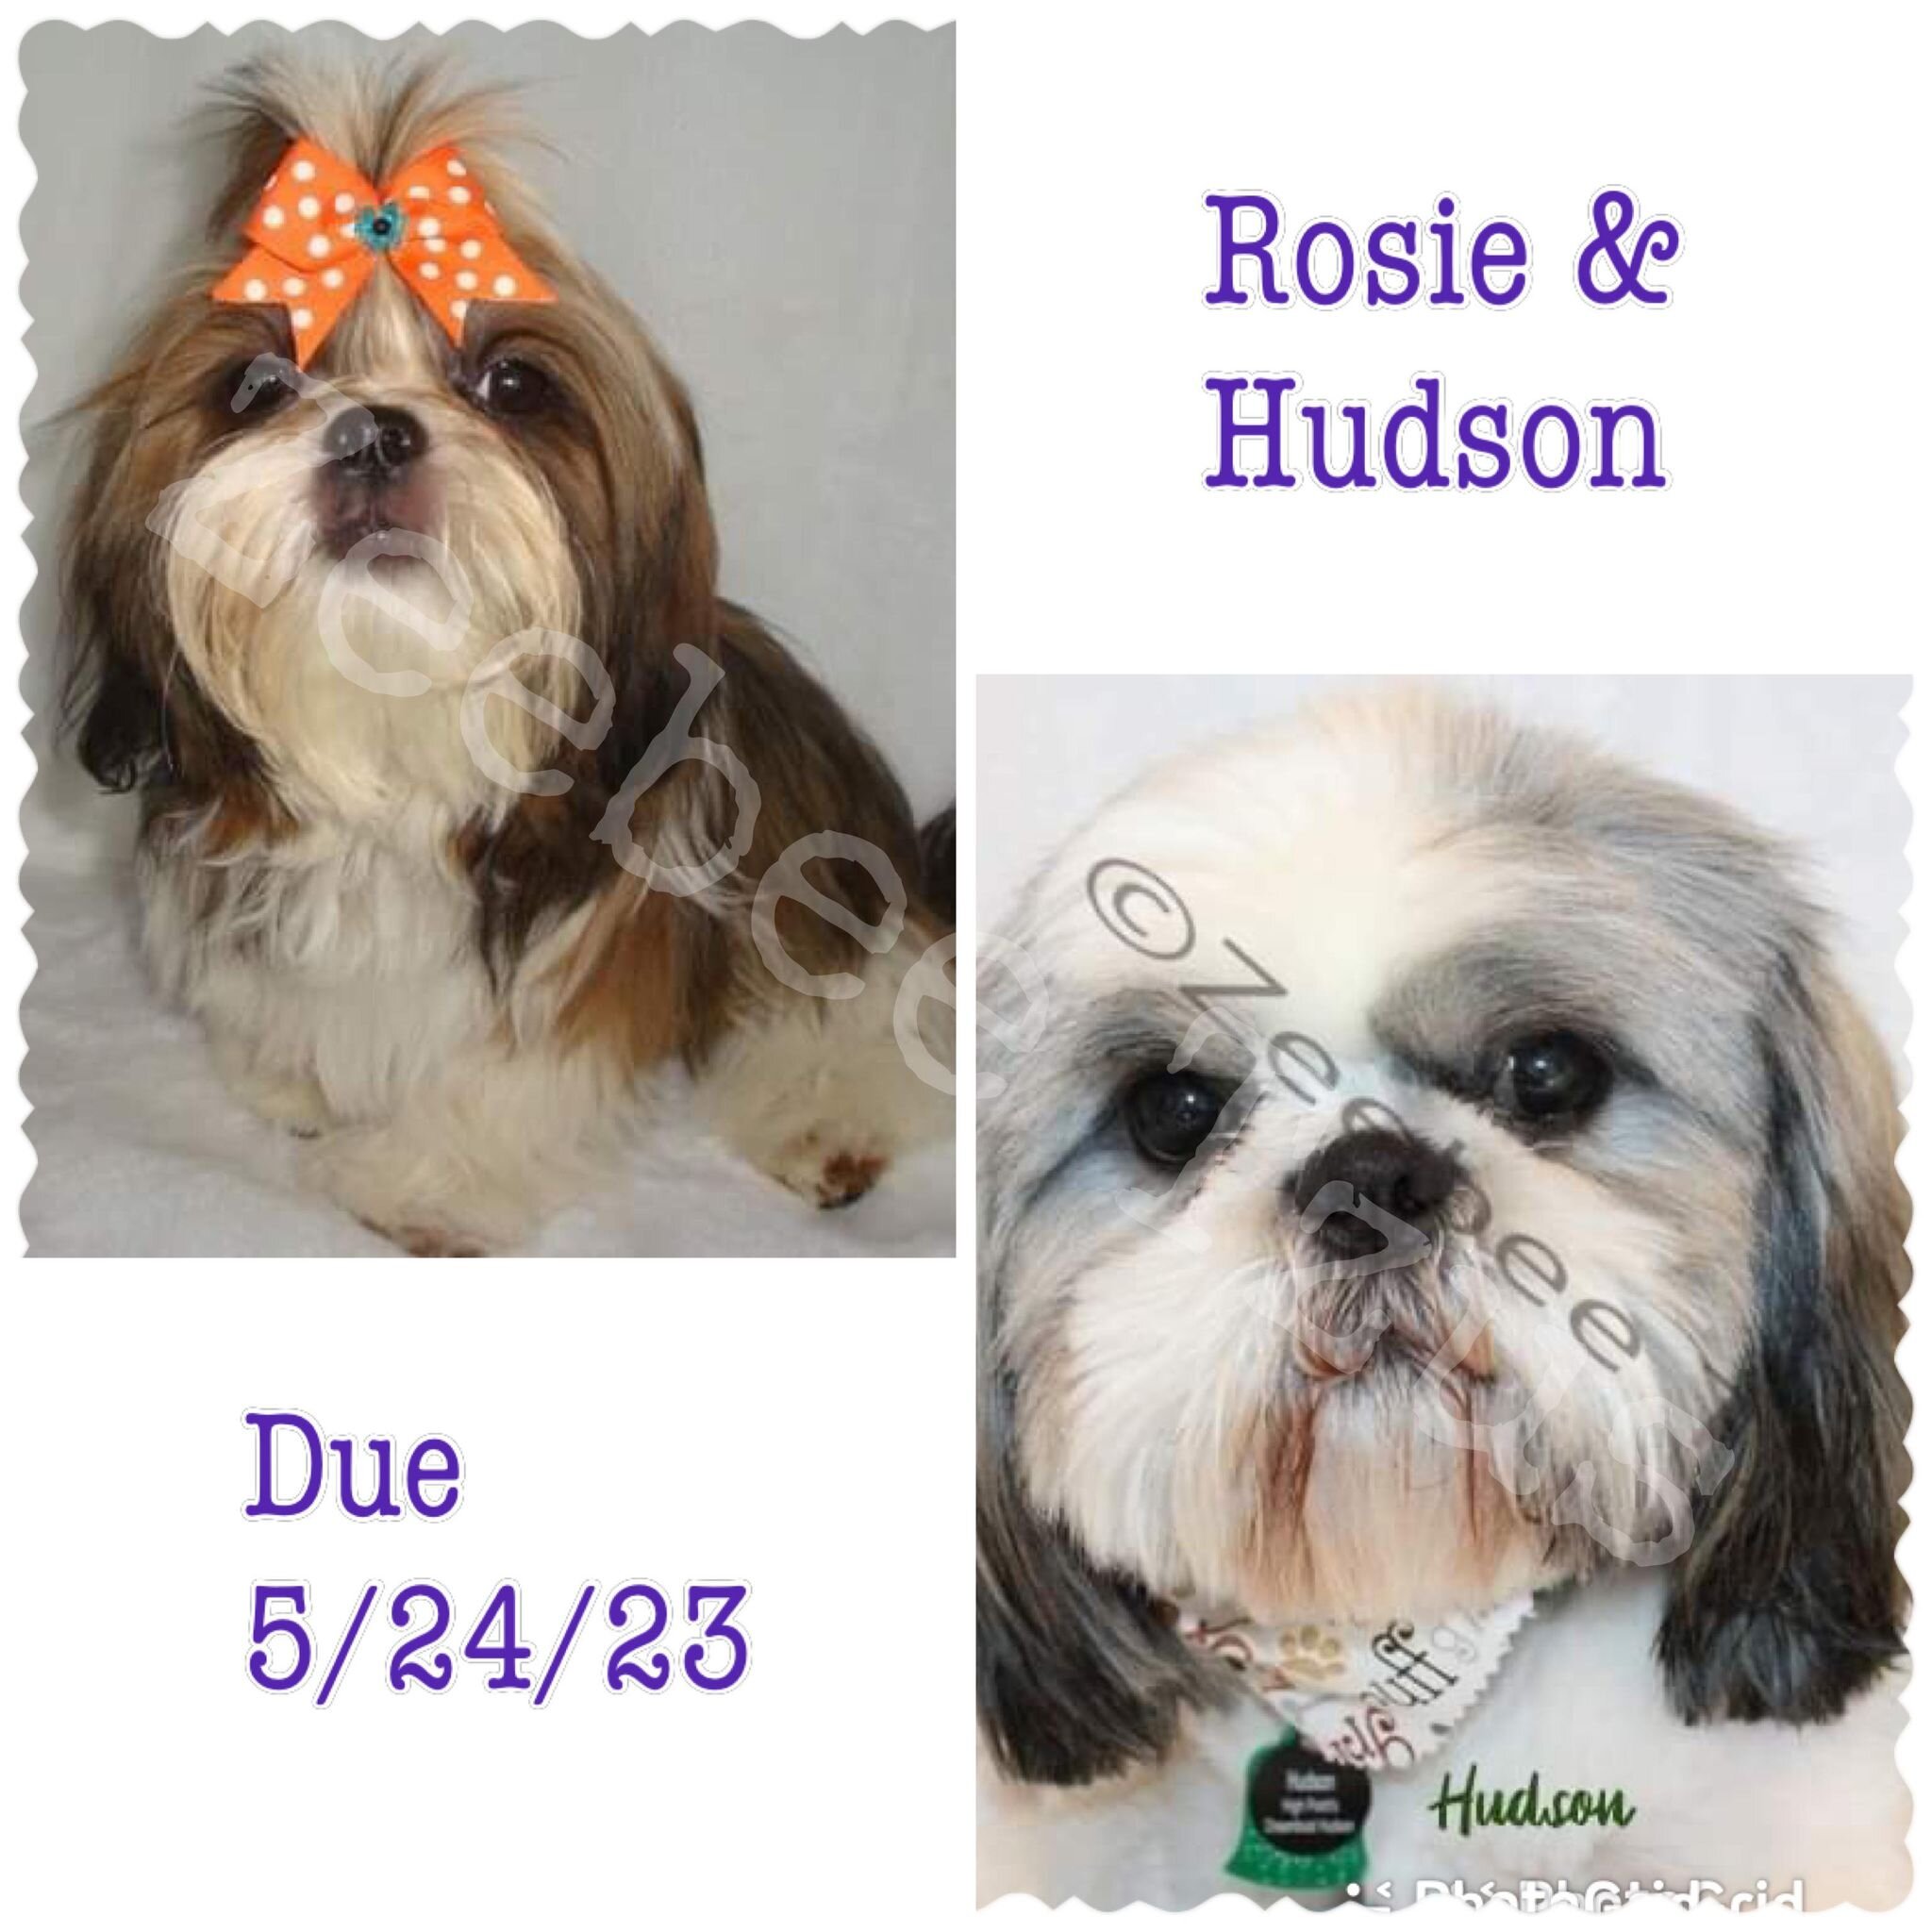 We are just under 2 weeks away from Rosie's litter with our new boy, Hudson, being his first litter as well. All pups will be partis and mid standard in size ranging from 10-14 pounds. First party pick for a girl and boy are taken. PM FOR INFO - NO A